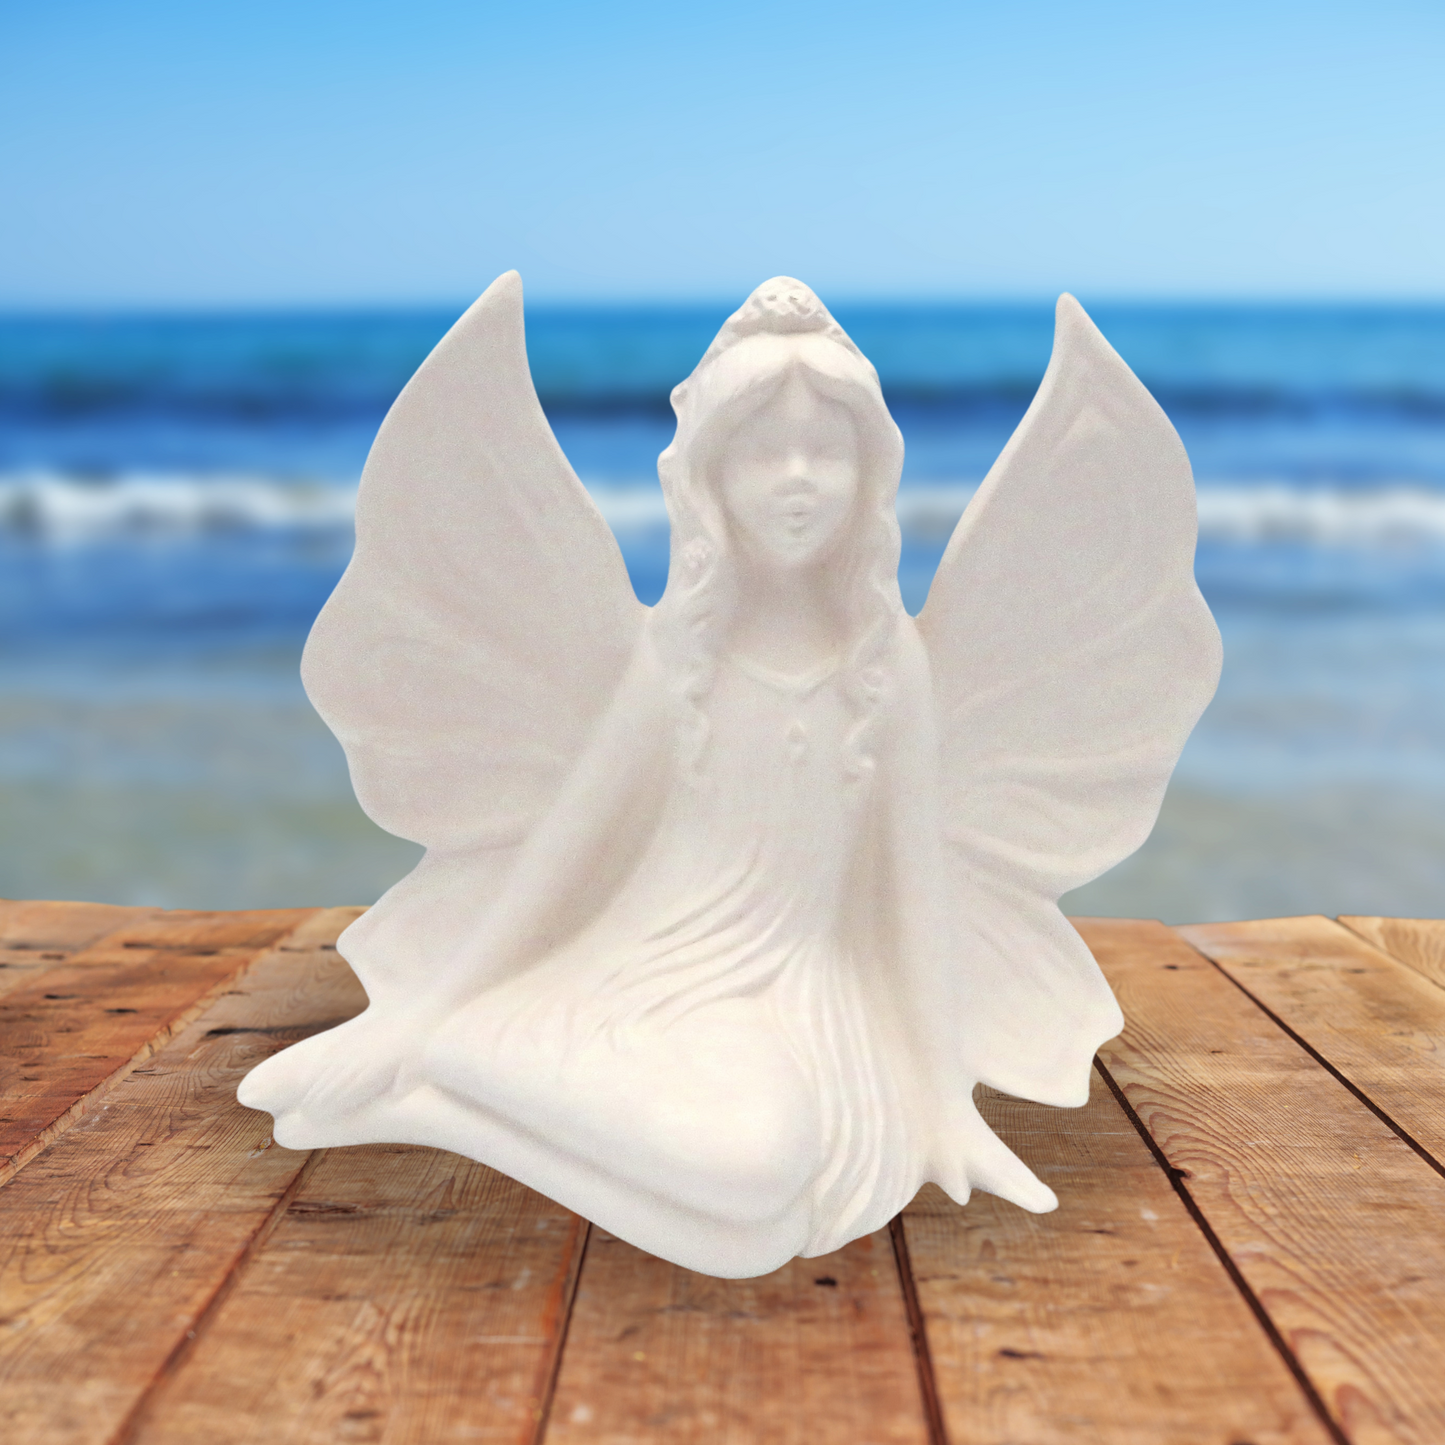 Handmade ready to paint side sitting fairy on a wooden table by the ocean